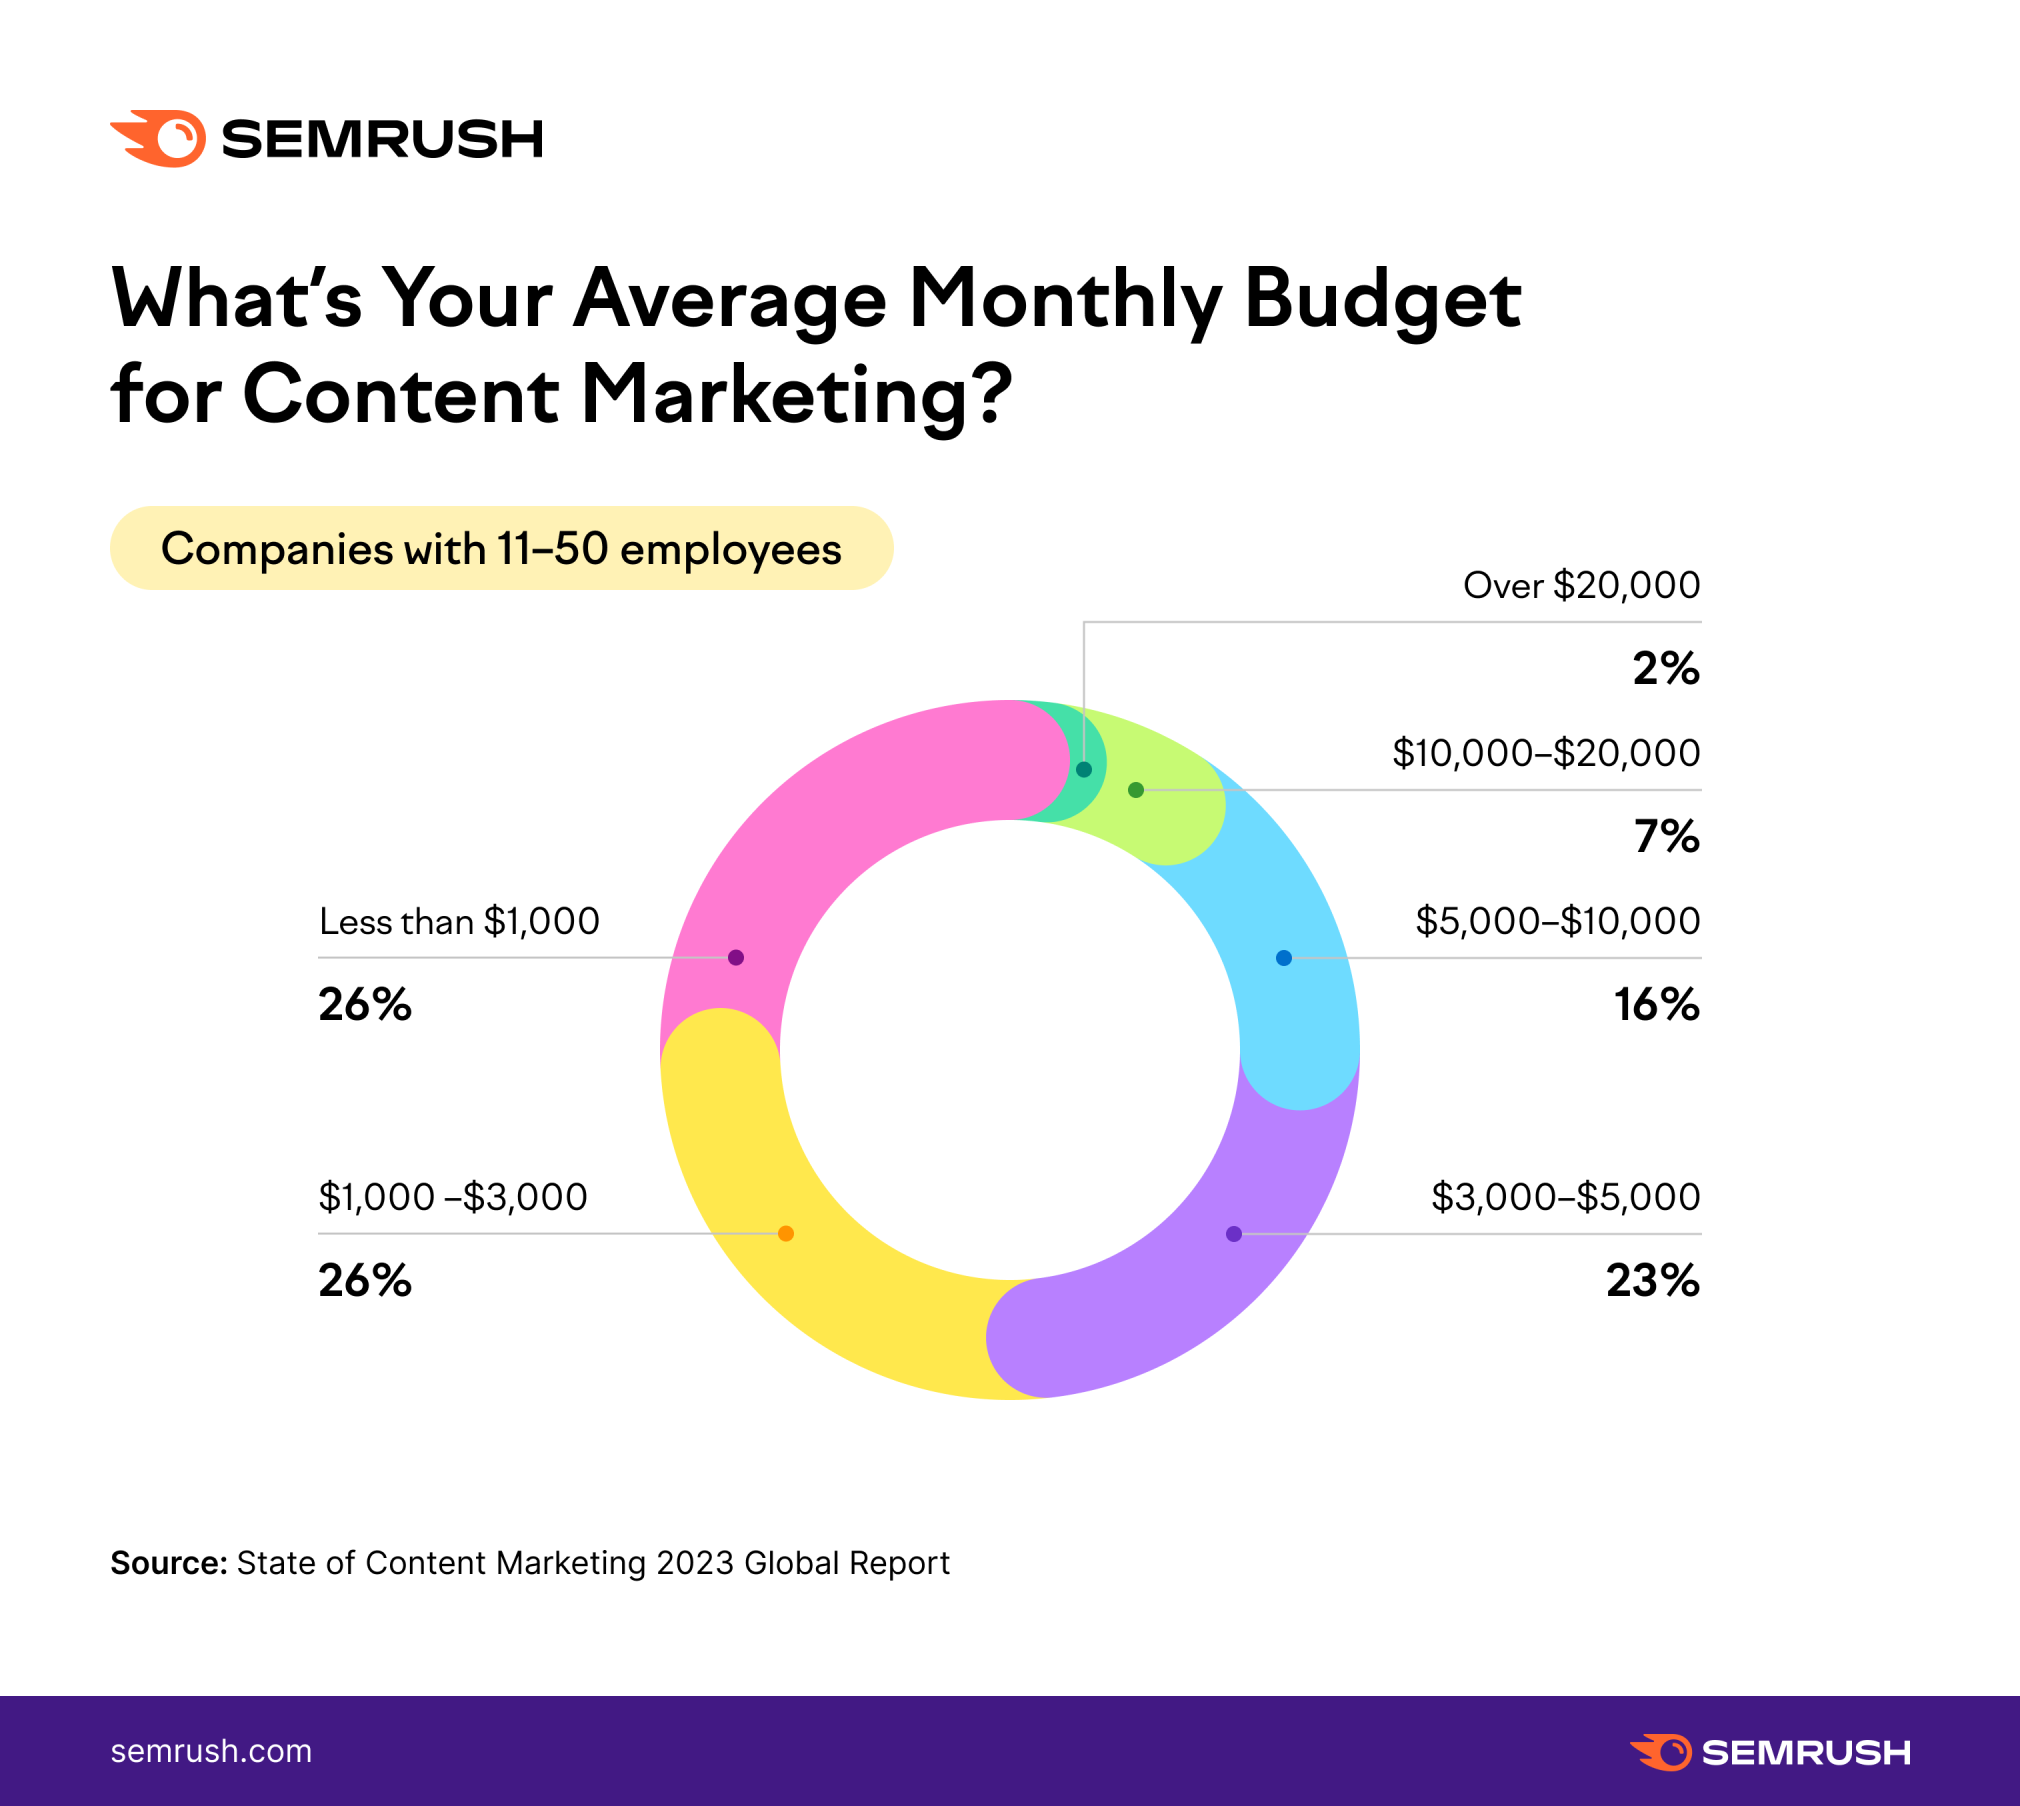 Small business content marketing budget in 2023